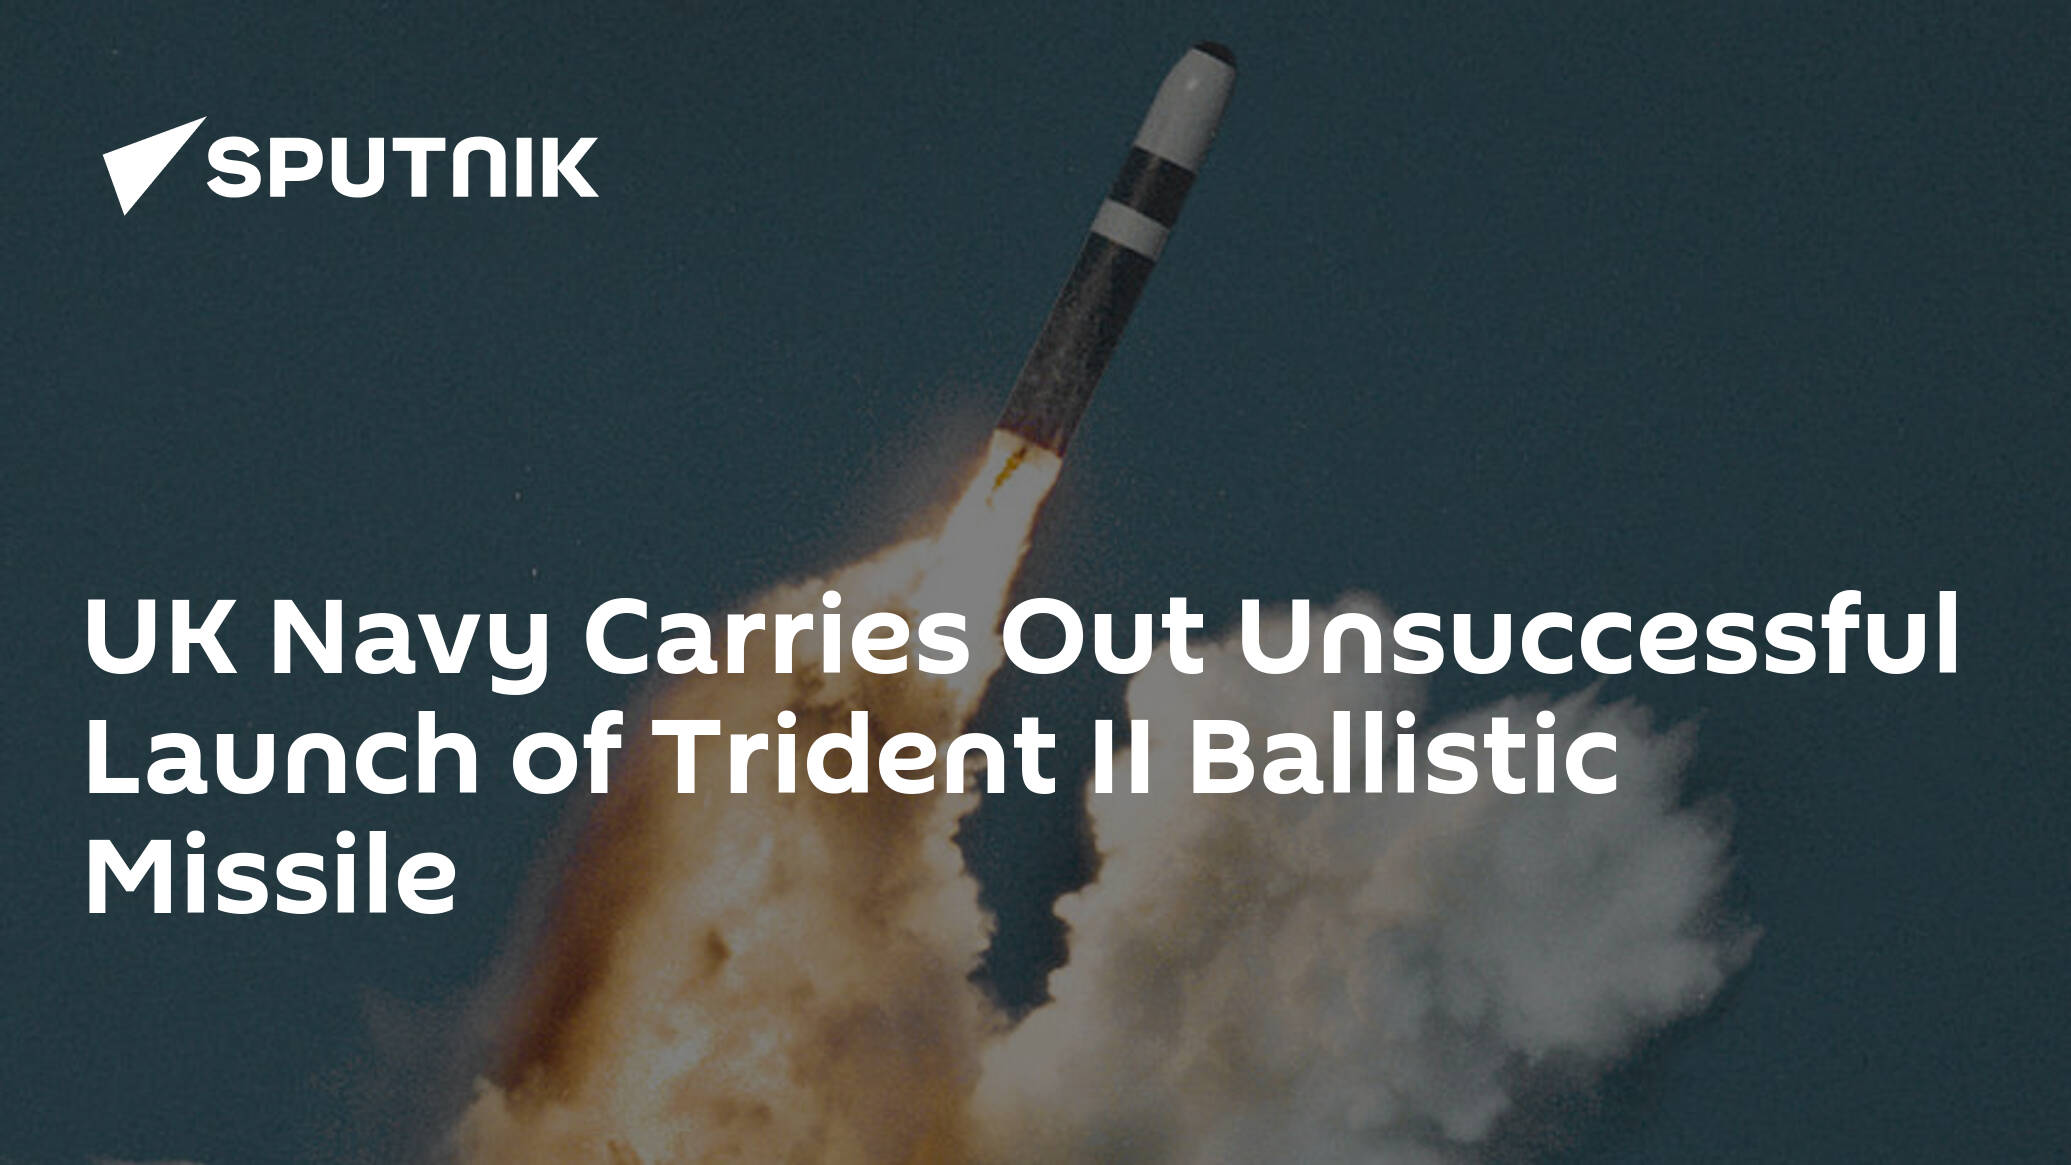 UK Navy Carries Out Unsuccessful Launch of Trident II Ballistic Missile